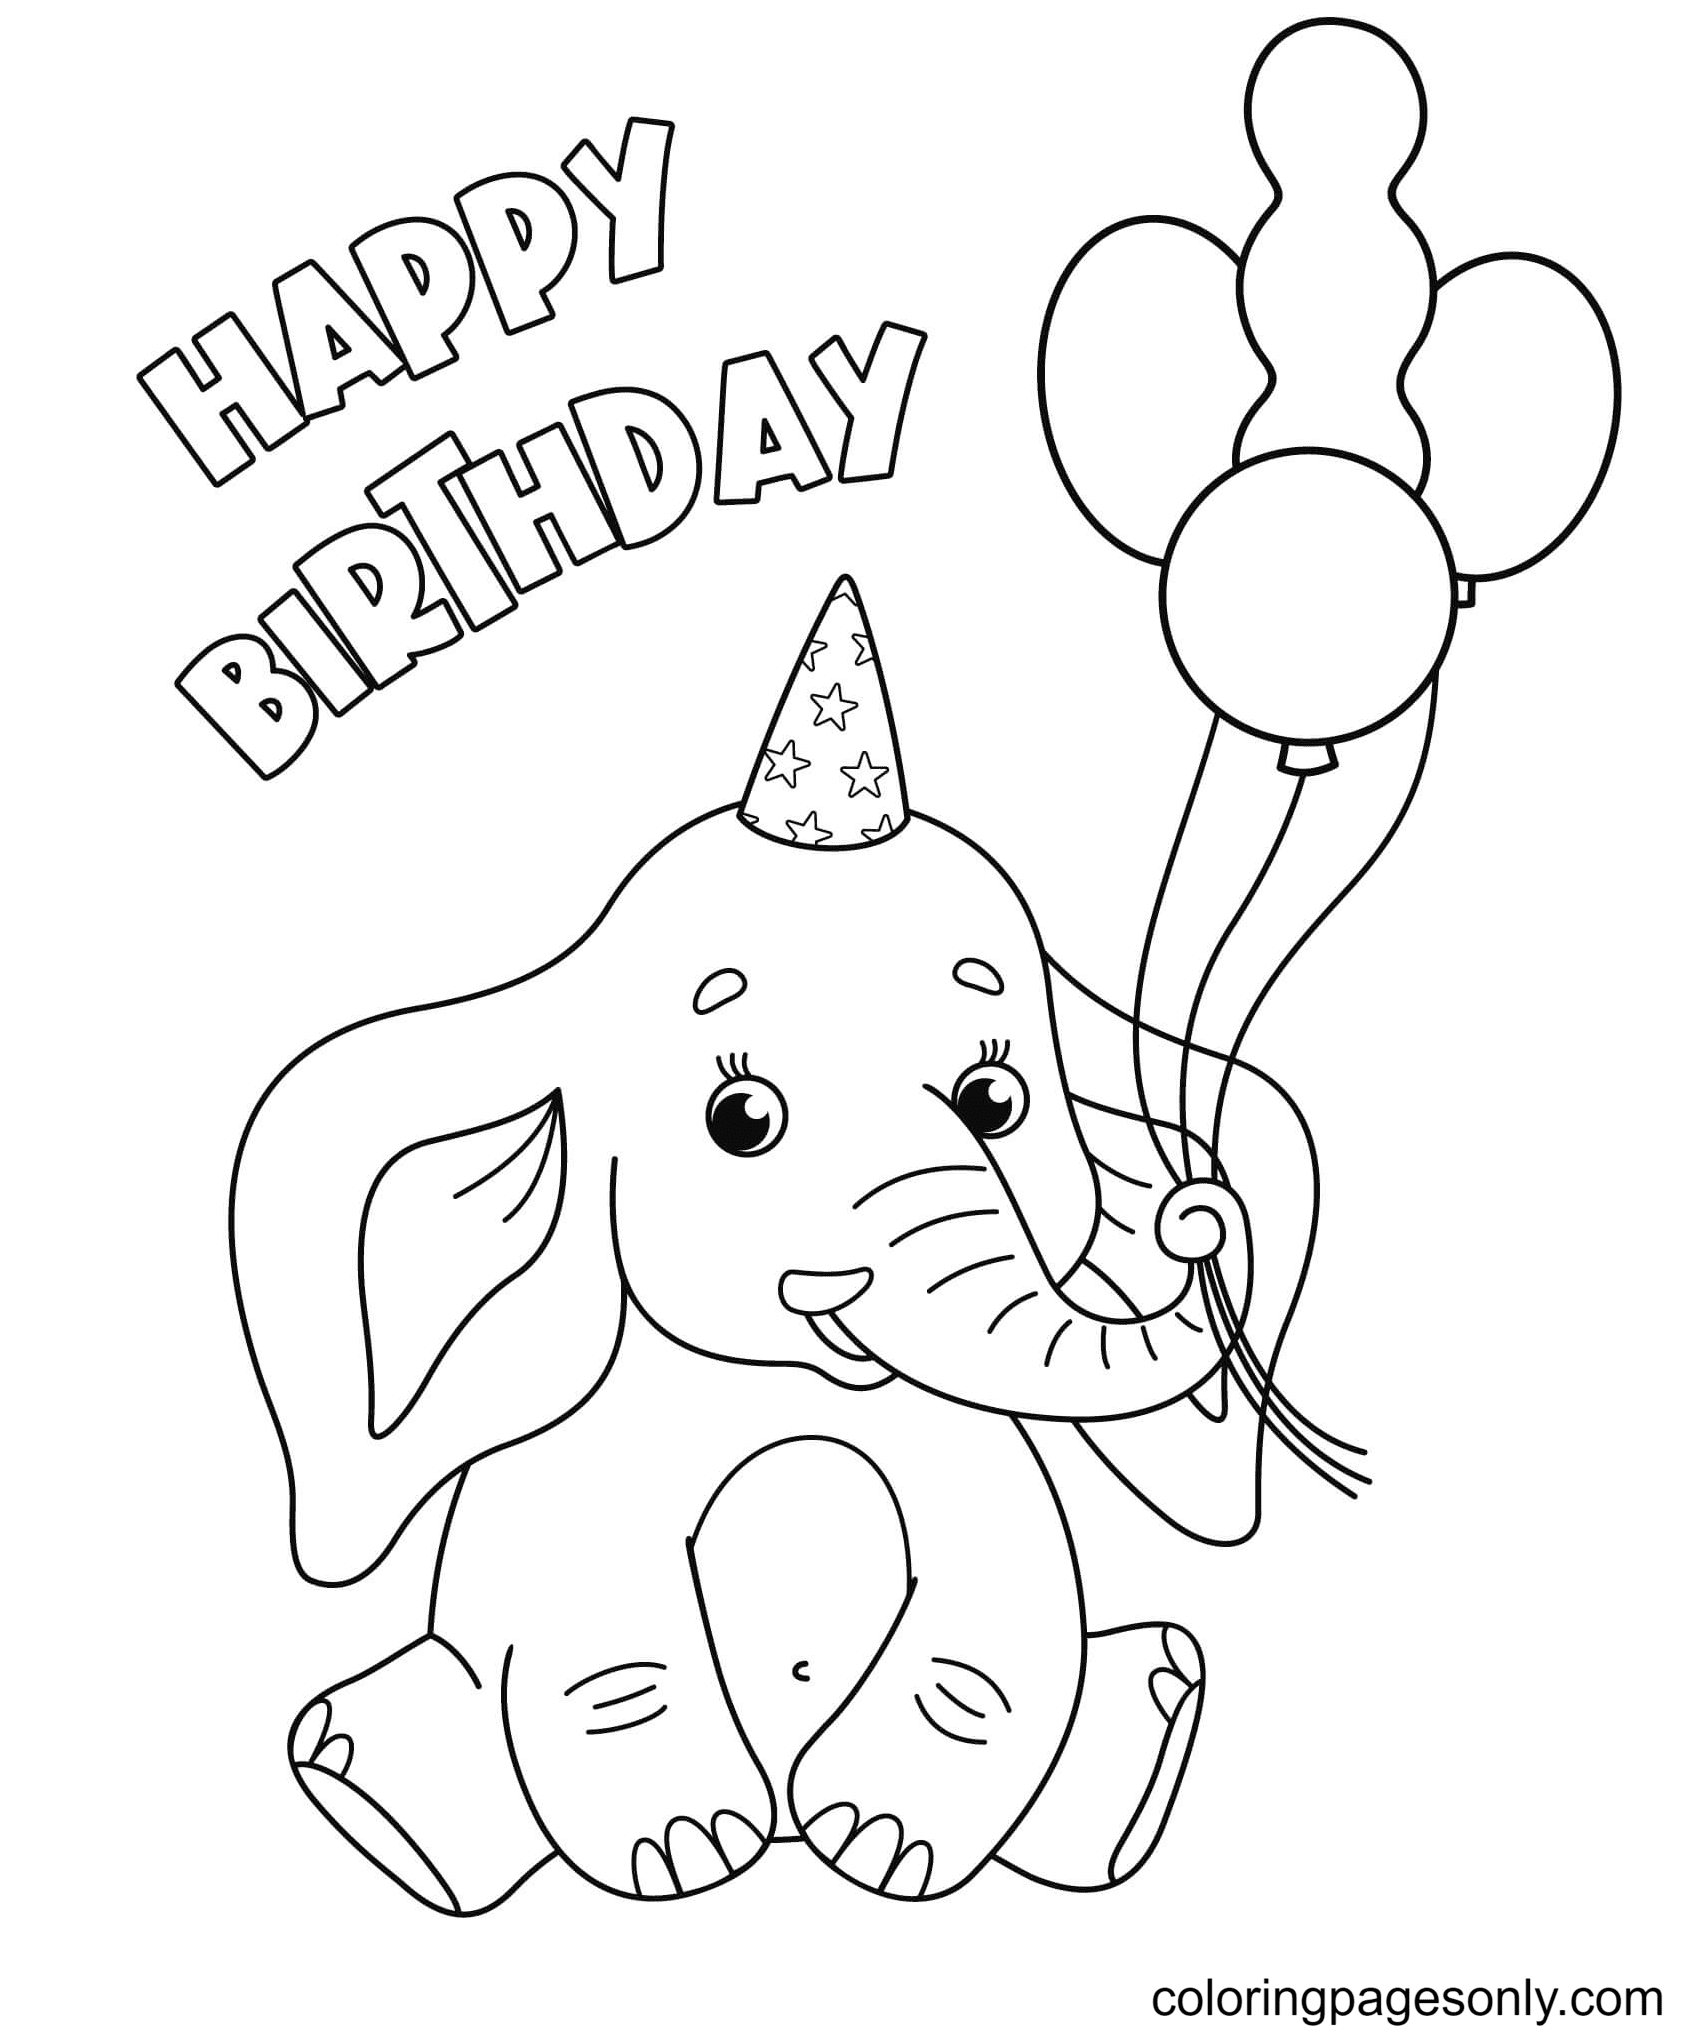 Happy Birthday with Elephant Coloring Page